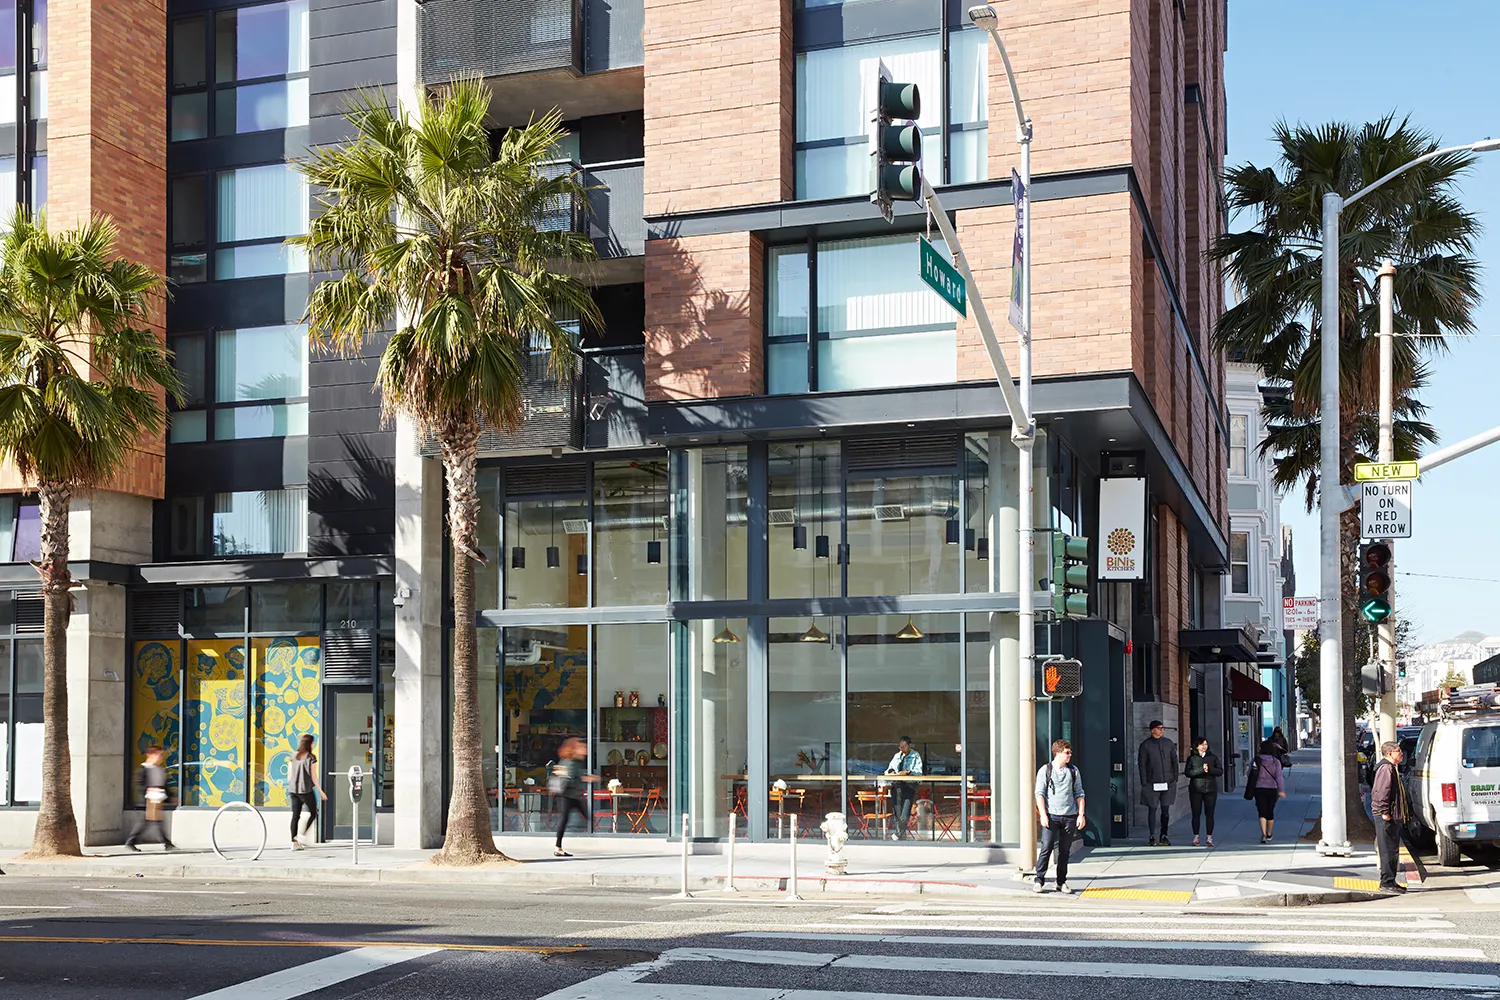 Exterior view of Bini’s Kitchen in San Francisco, CA.